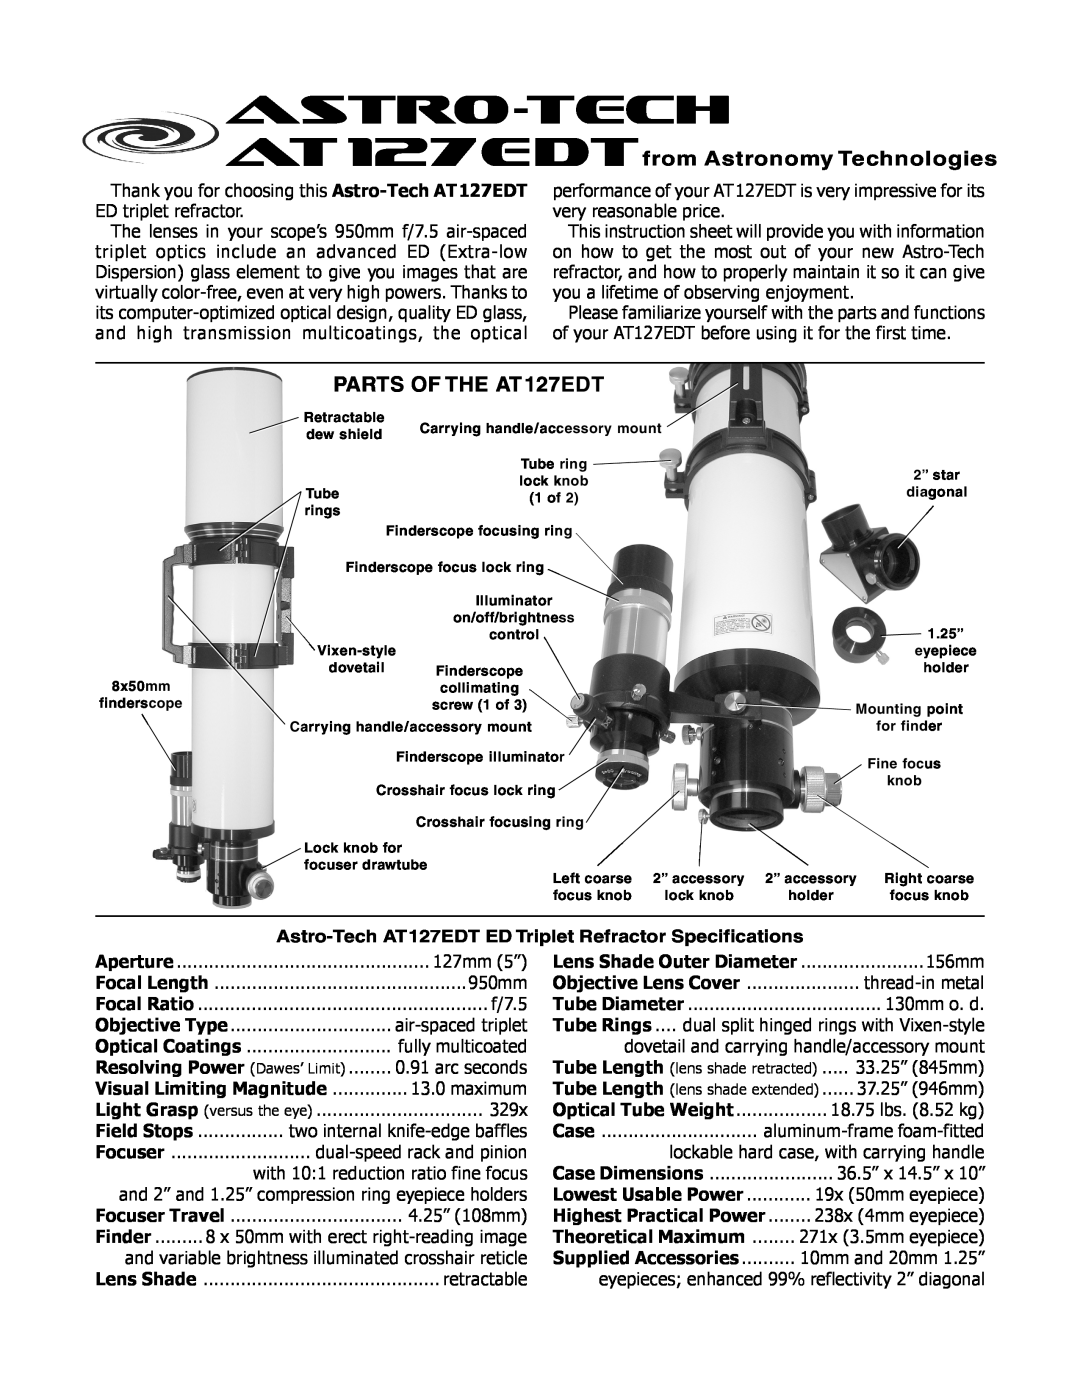 Meade AT 127EDT instruction sheet Astro-Tech AT127EDT ED Triplet Refractor Specifications, astro-tech, Lowest Usable Power 